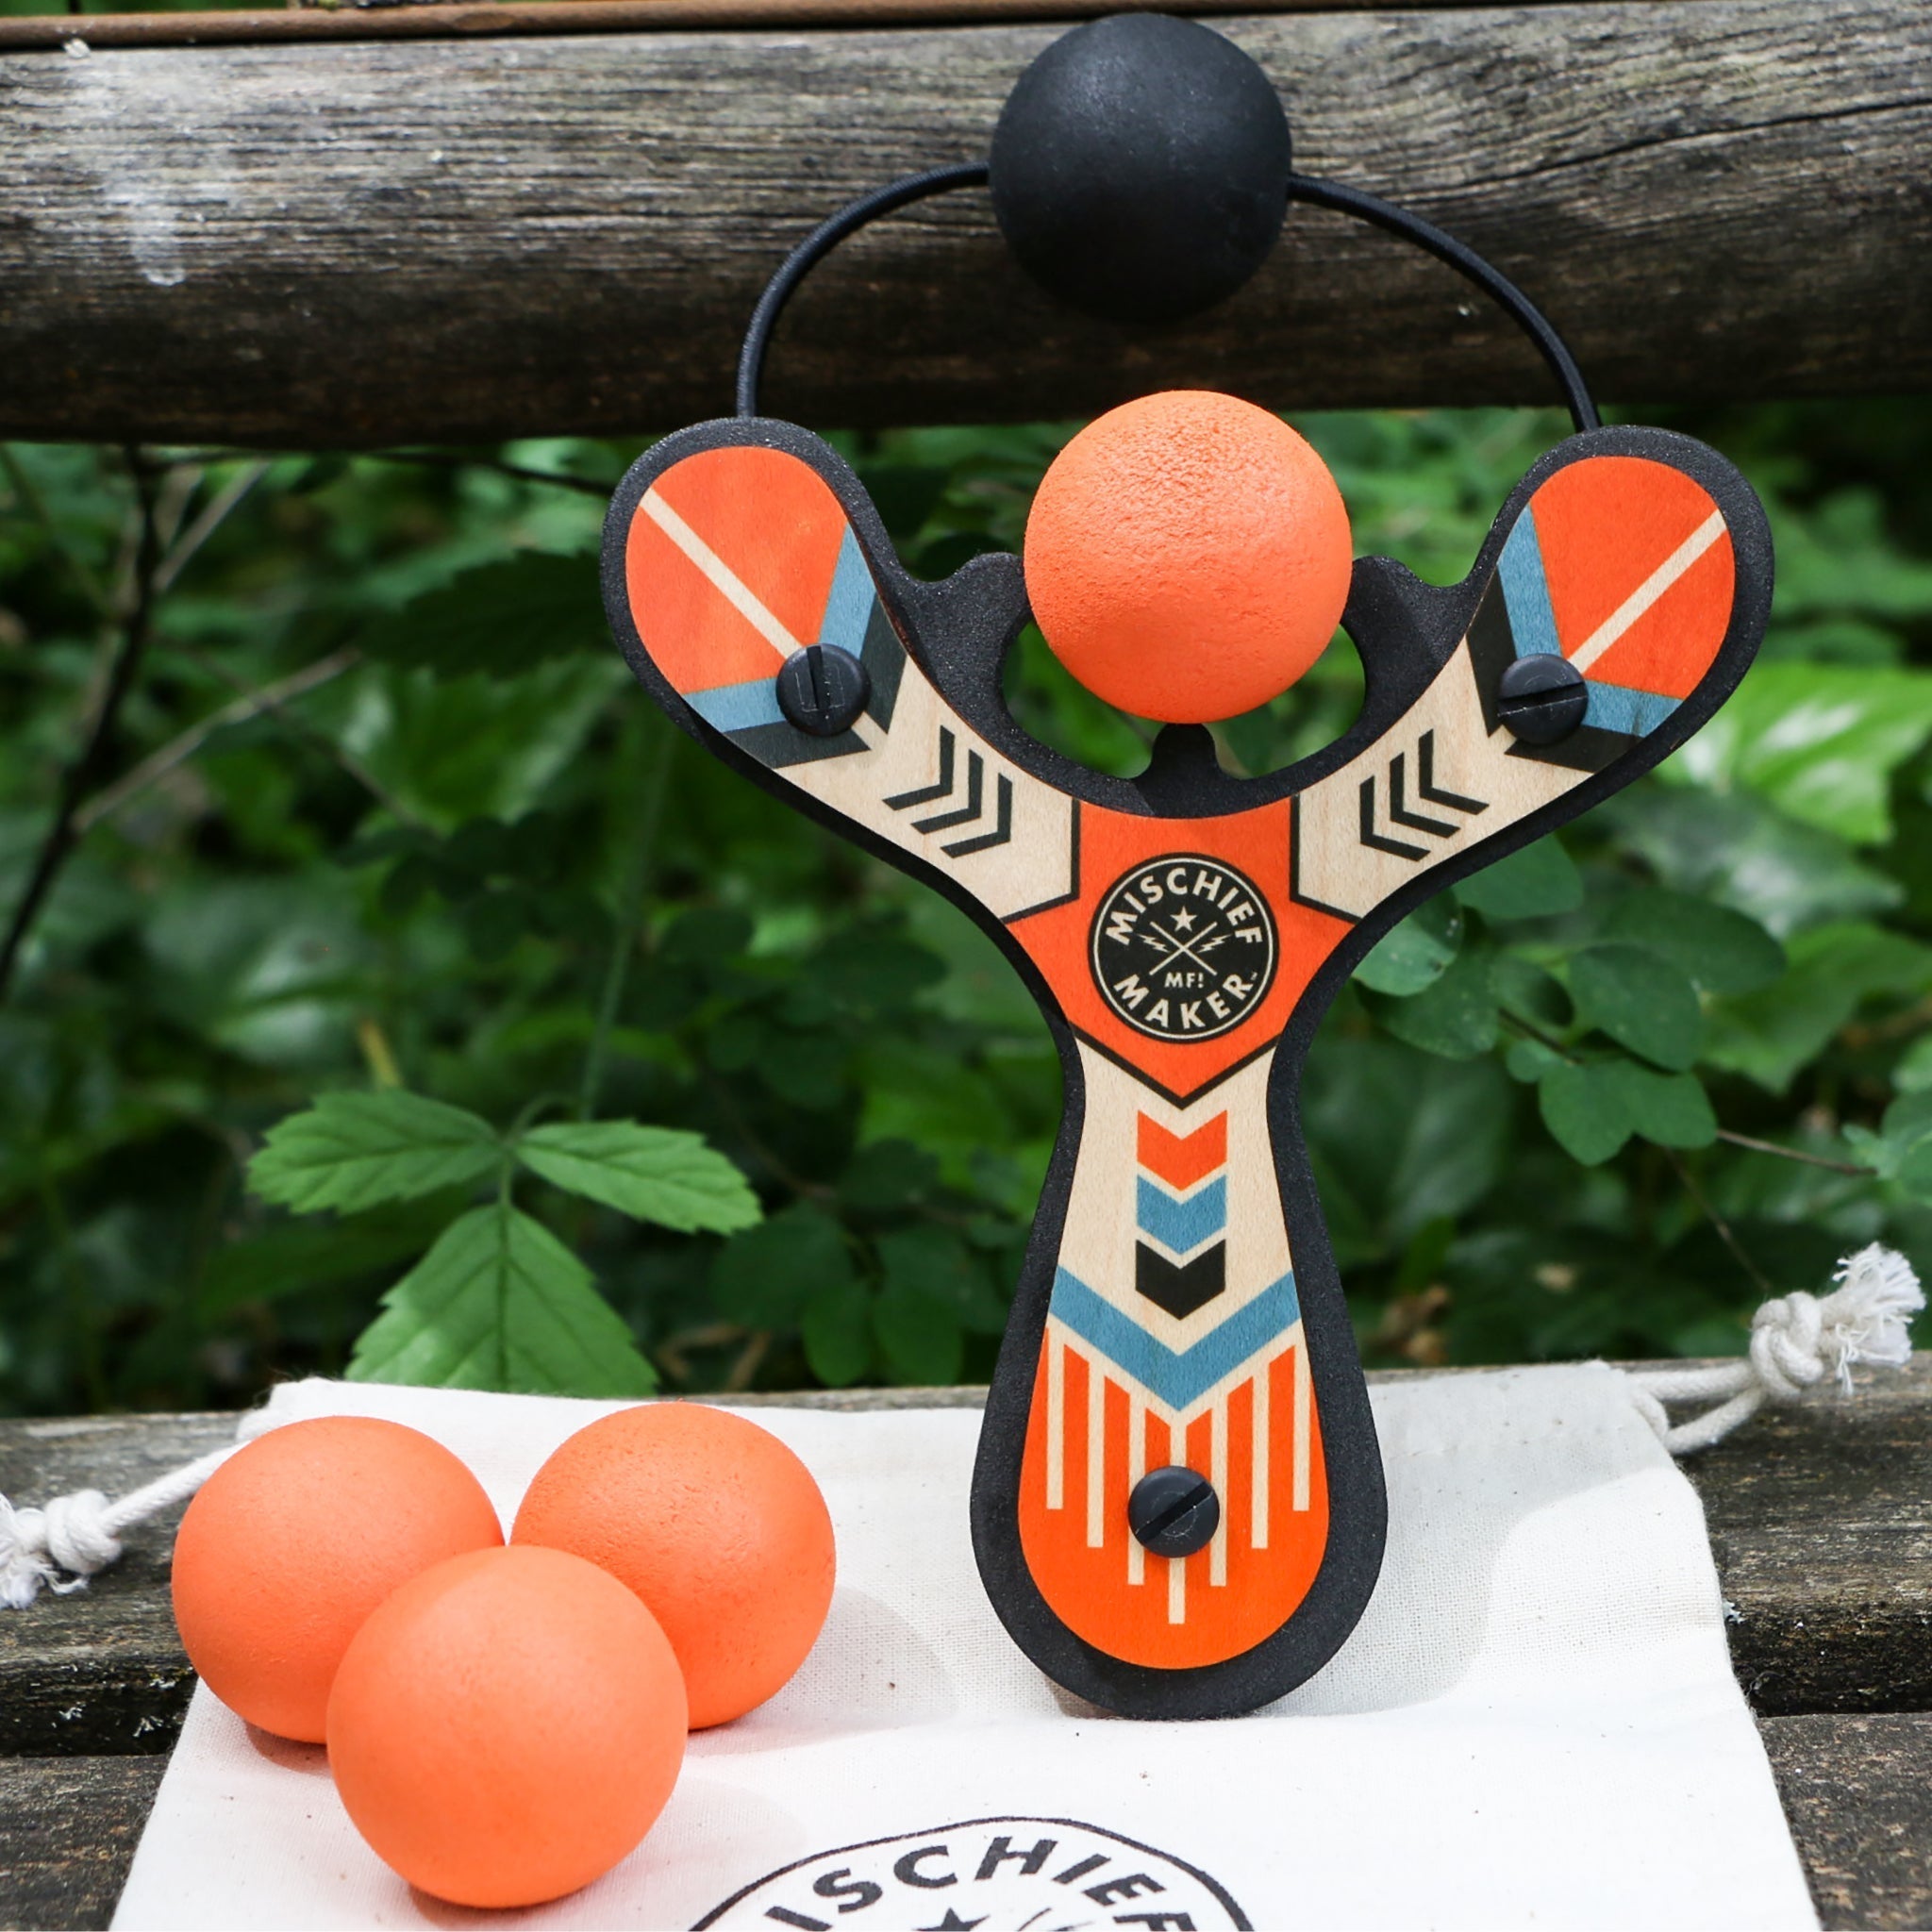 Orange Classic wood slingshot with 4 soft foam balls outside. Mischief Maker by Mighty Fun!